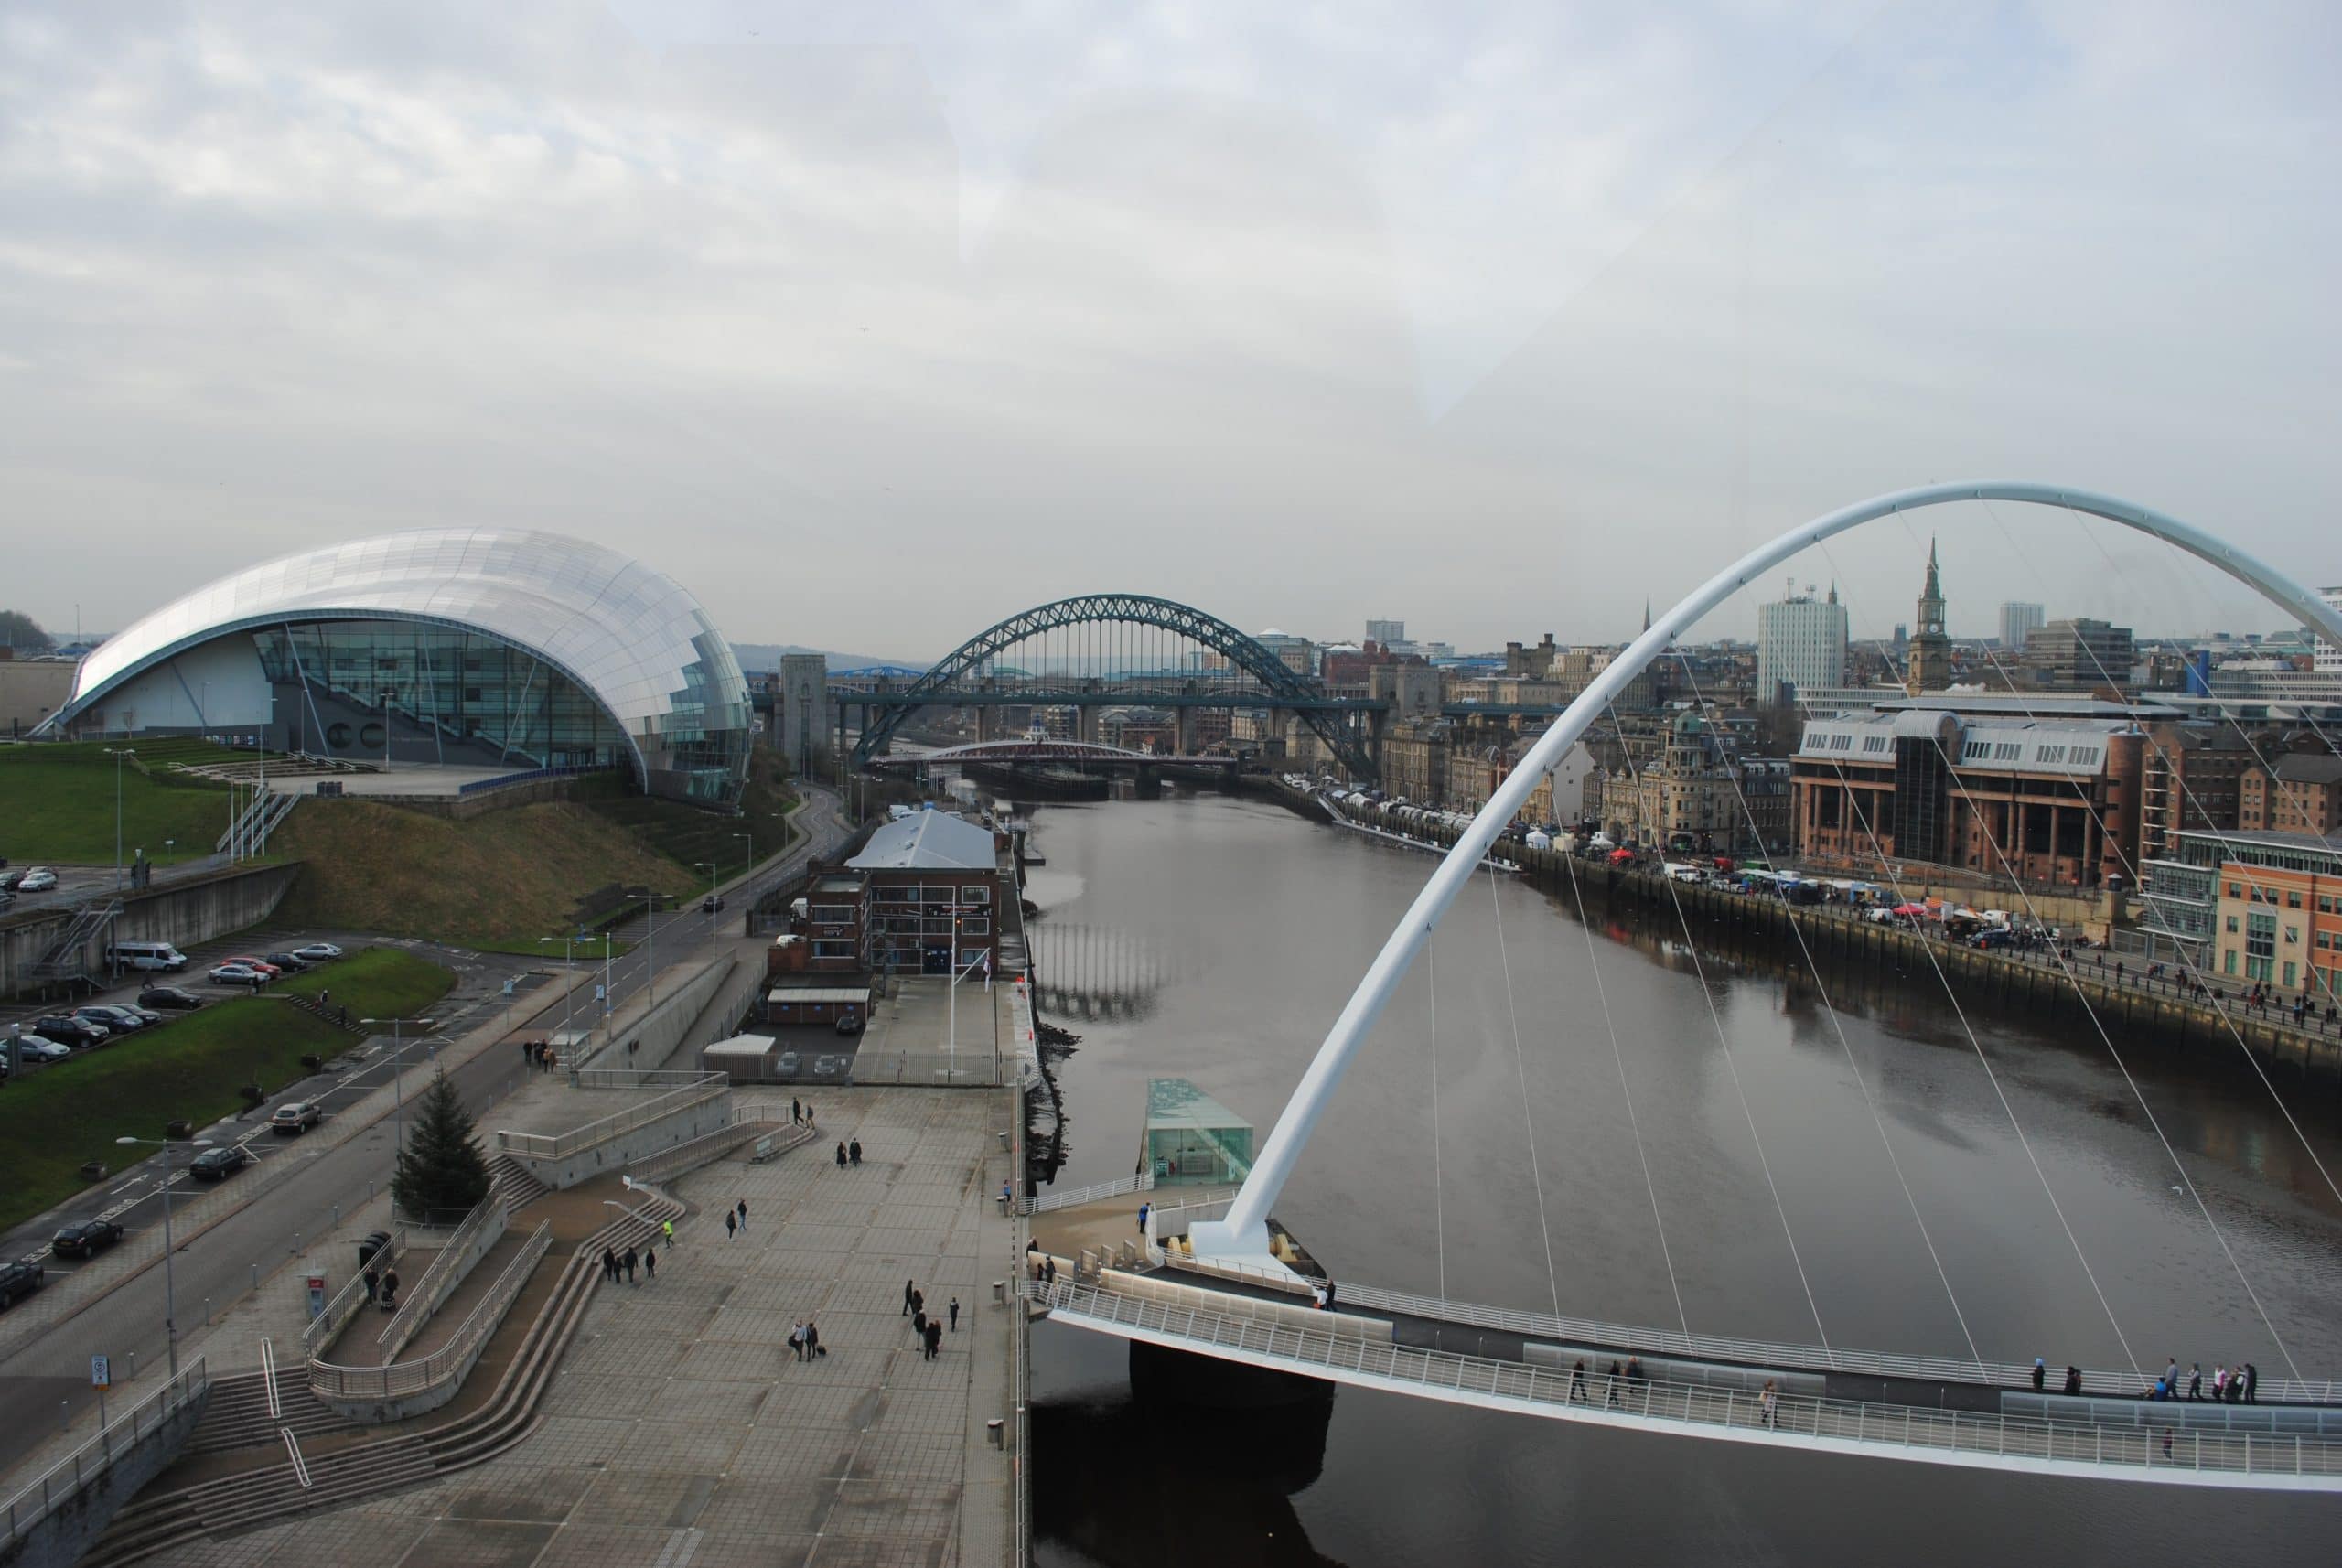 The riverside that separates Newcastle and Gateshead on a cloudy day, with two bridges in clear view.